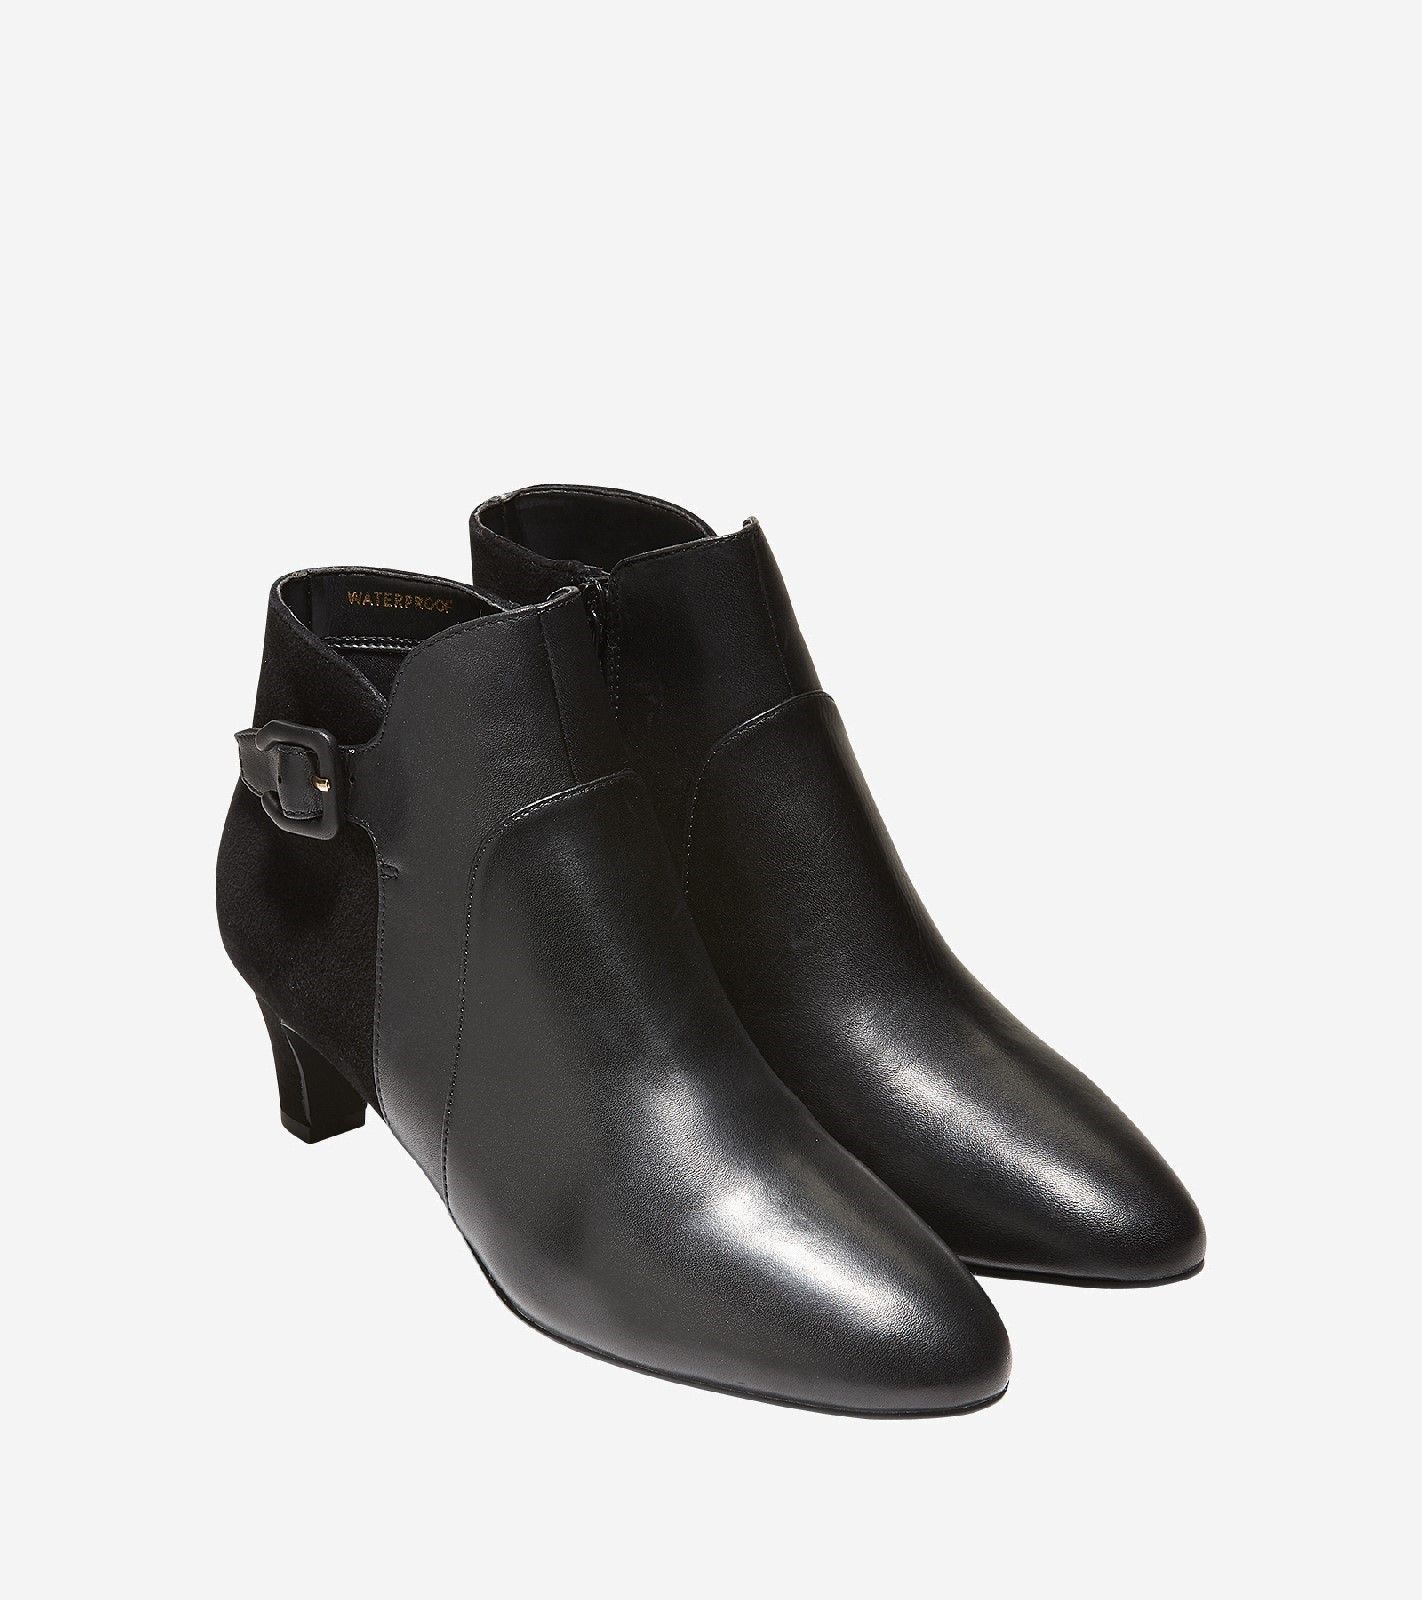 Put the bulky Wellies away and break out the waterproof Sylvia Bootie the next time it rains. This sleek yet streamlined style is crafted in waterproof suede and leather and features buckle detailing. WP leather and WP suede or printed haircalf upper with buckle detail and zipper..